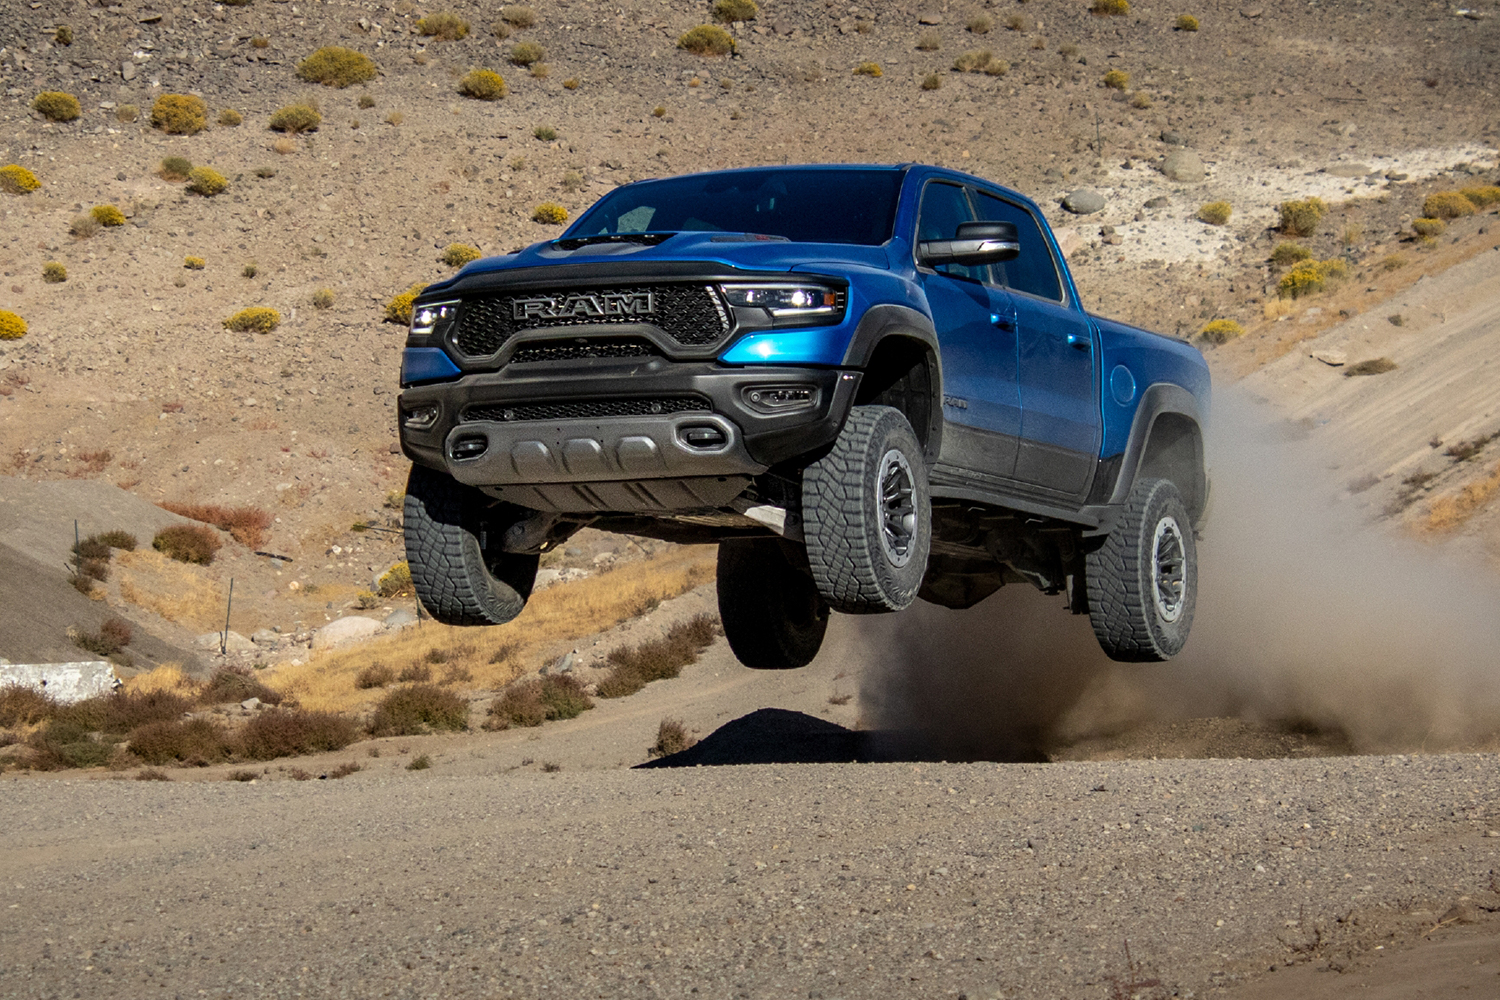 A blue 2021 Ram 1500 TRX pickup truck gets some airtime